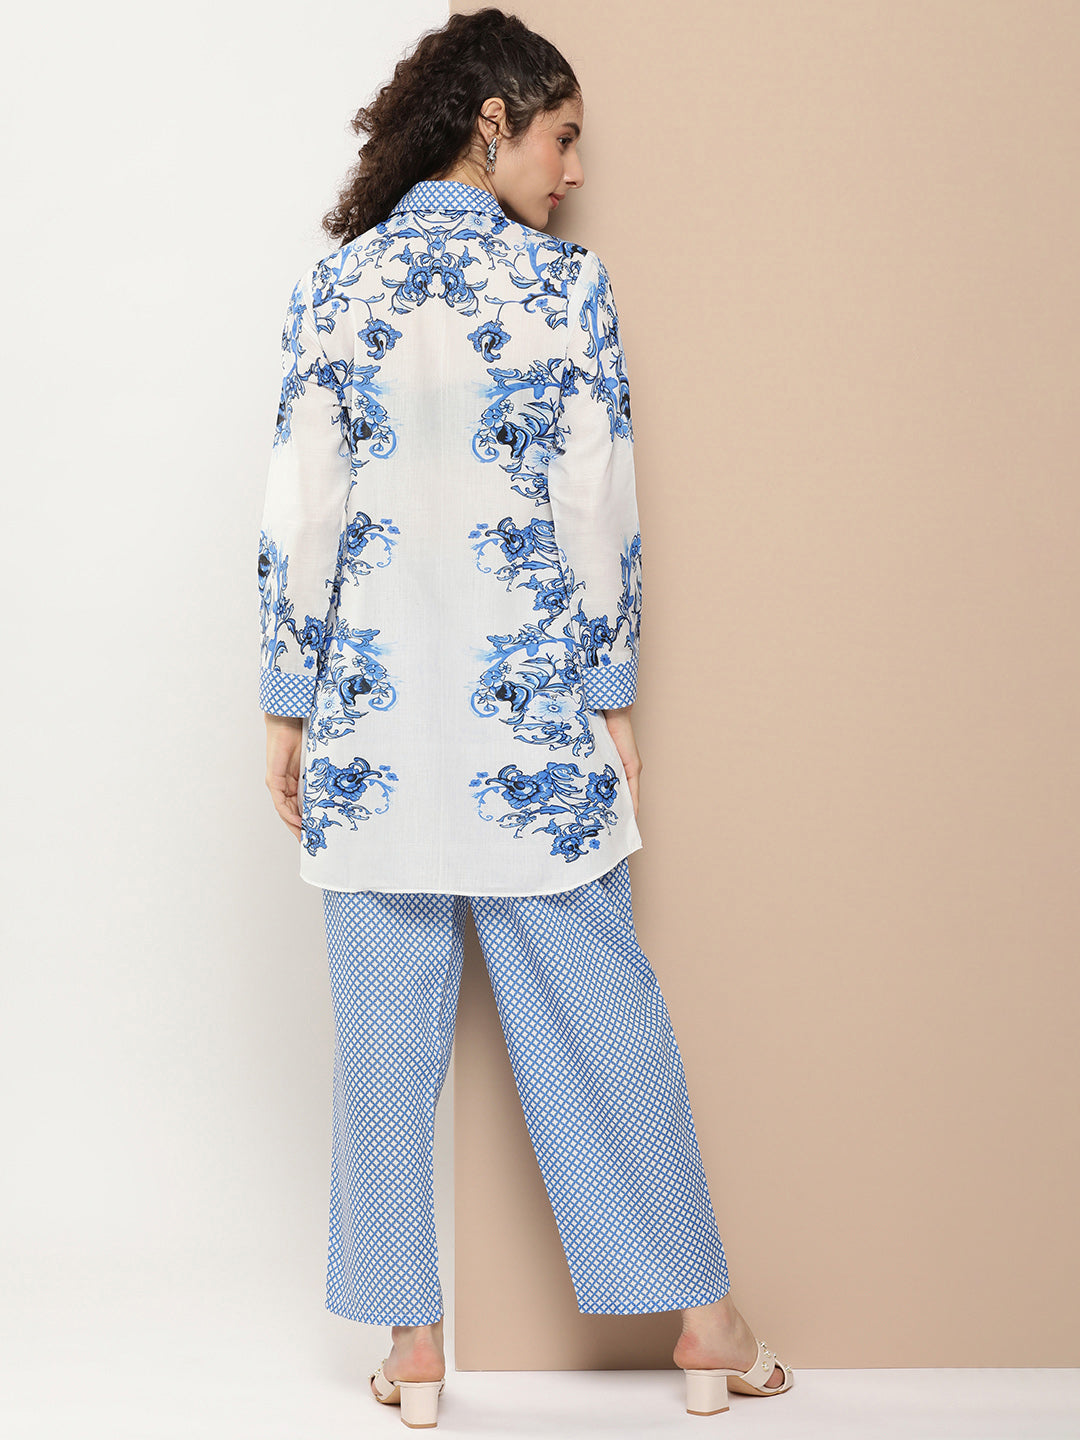 Women's Off White And Blue Floral Print Kurta With Printed Pants - Bhama Couture